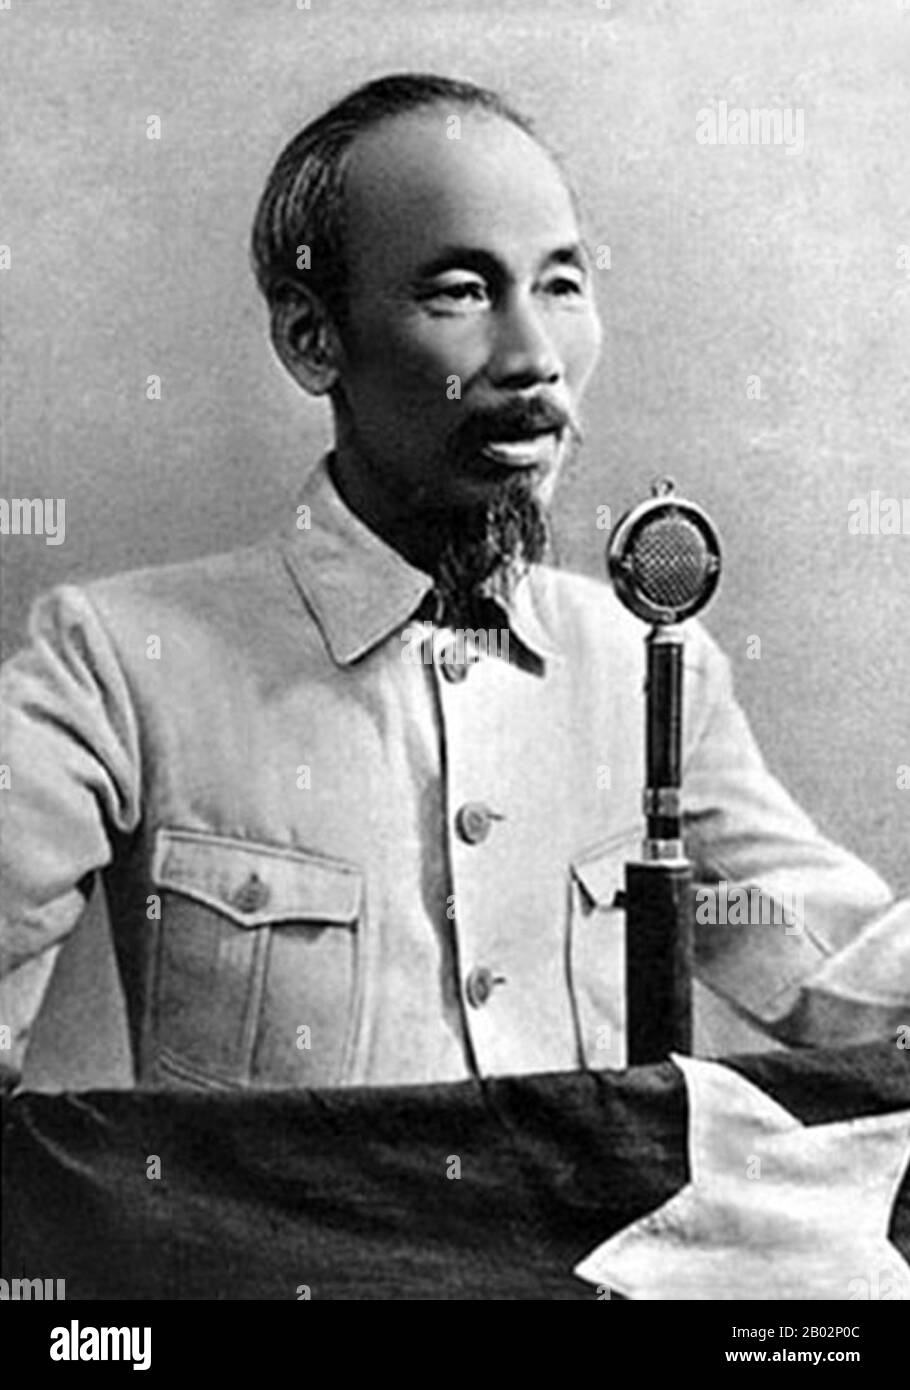 Hồ Chí Minh, born Nguyễn Sinh Cung and also known as Nguyễn Ái Quốc (19 May 1890 – 3 September 1969) was a Vietnamese Communist revolutionary leader who was prime minister (1946–1955) and president (1945–1969) of the Democratic Republic of Vietnam (North Vietnam).  He formed the Democratic Republic of Vietnam and led the Viet Cong during the Vietnam War until his death. Hồ led the Viet Minh independence movement from 1941 onward, establishing the communist-governed Democratic Republic of Vietnam in 1945 and defeating the French Union in 1954 at Dien Bien Phu.  He lost political power inside No Stock Photo